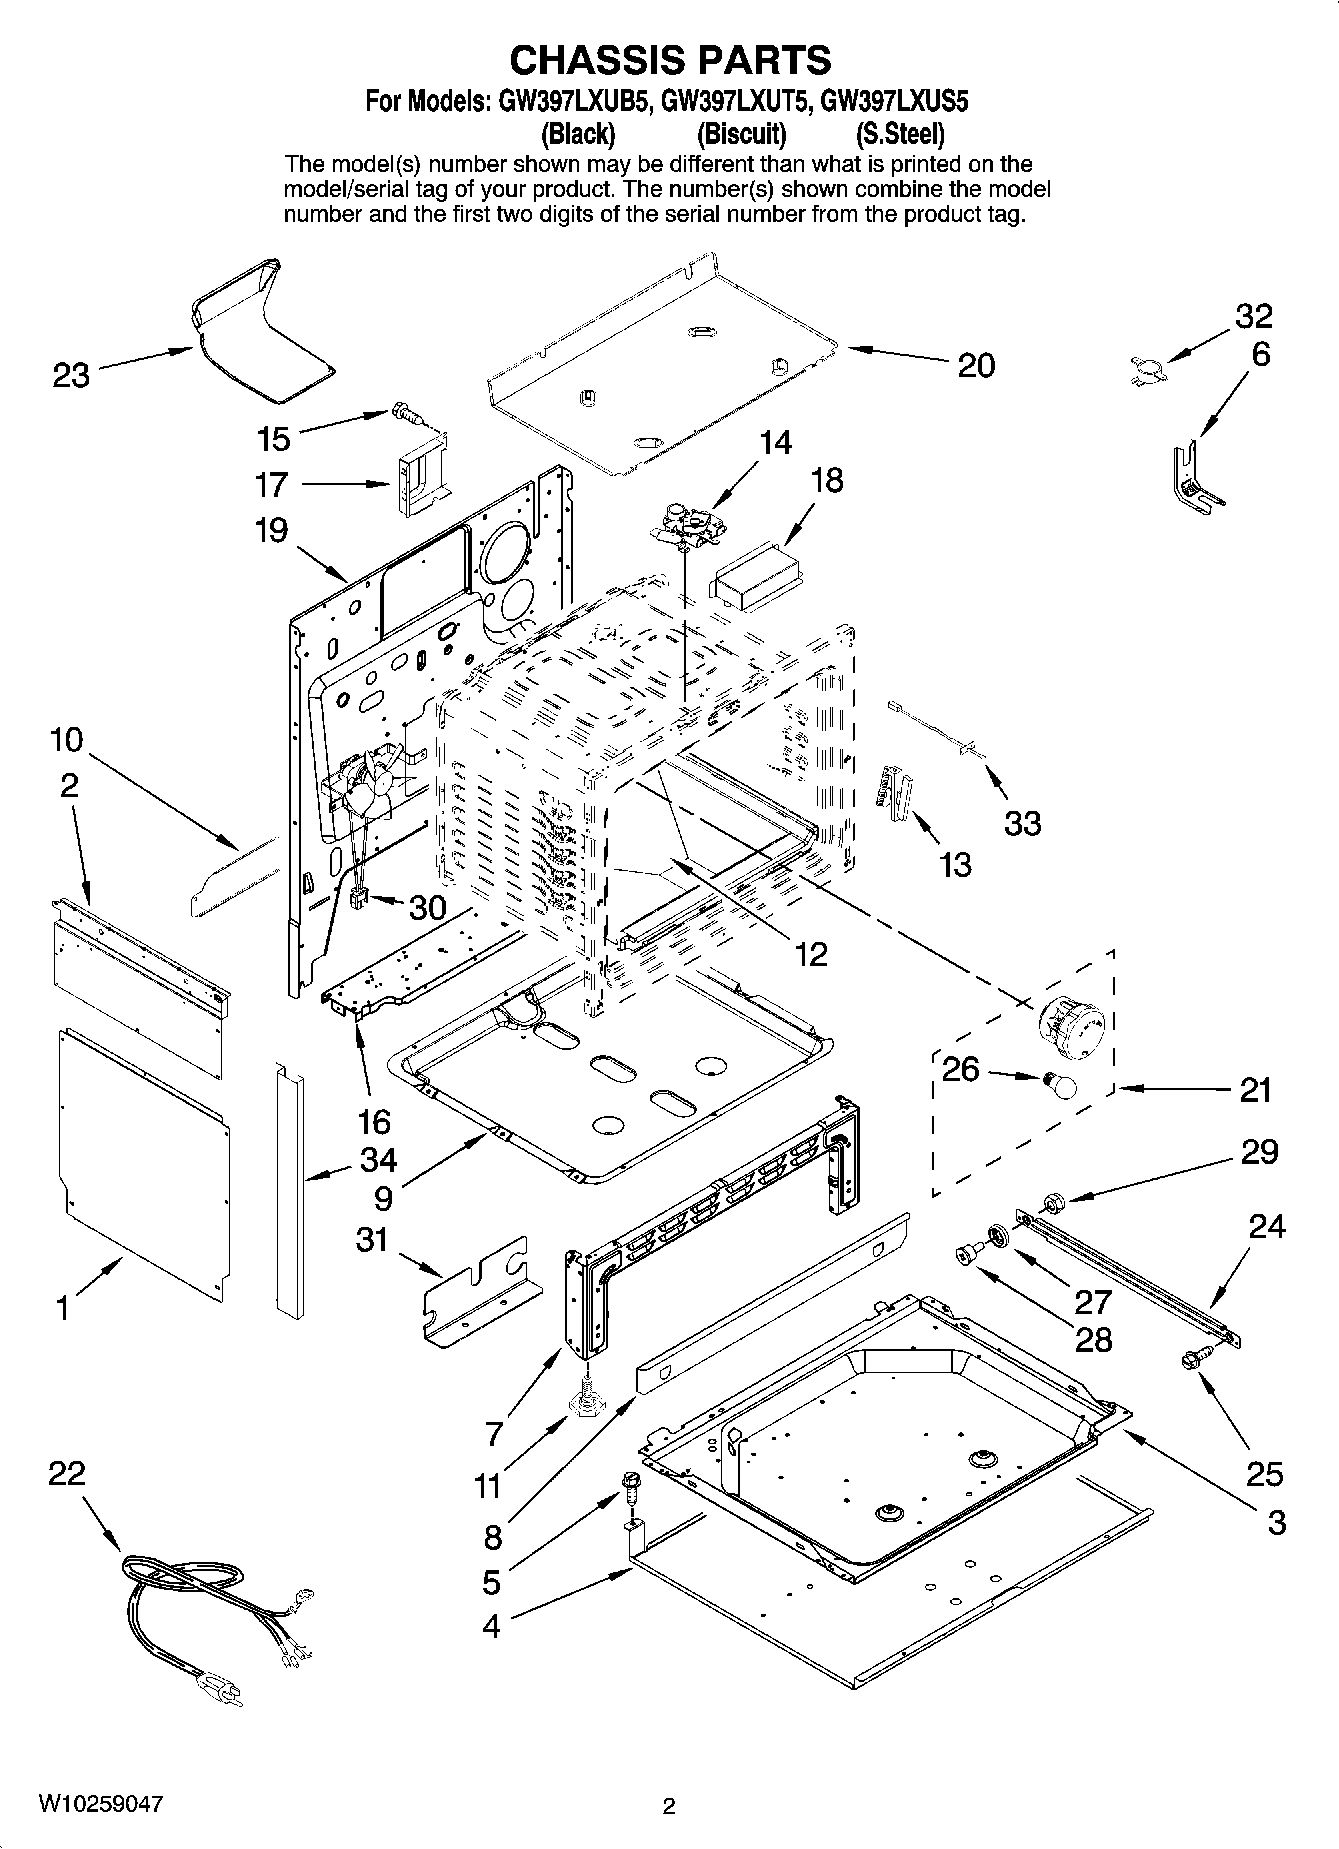 02 - CHASSIS PARTS